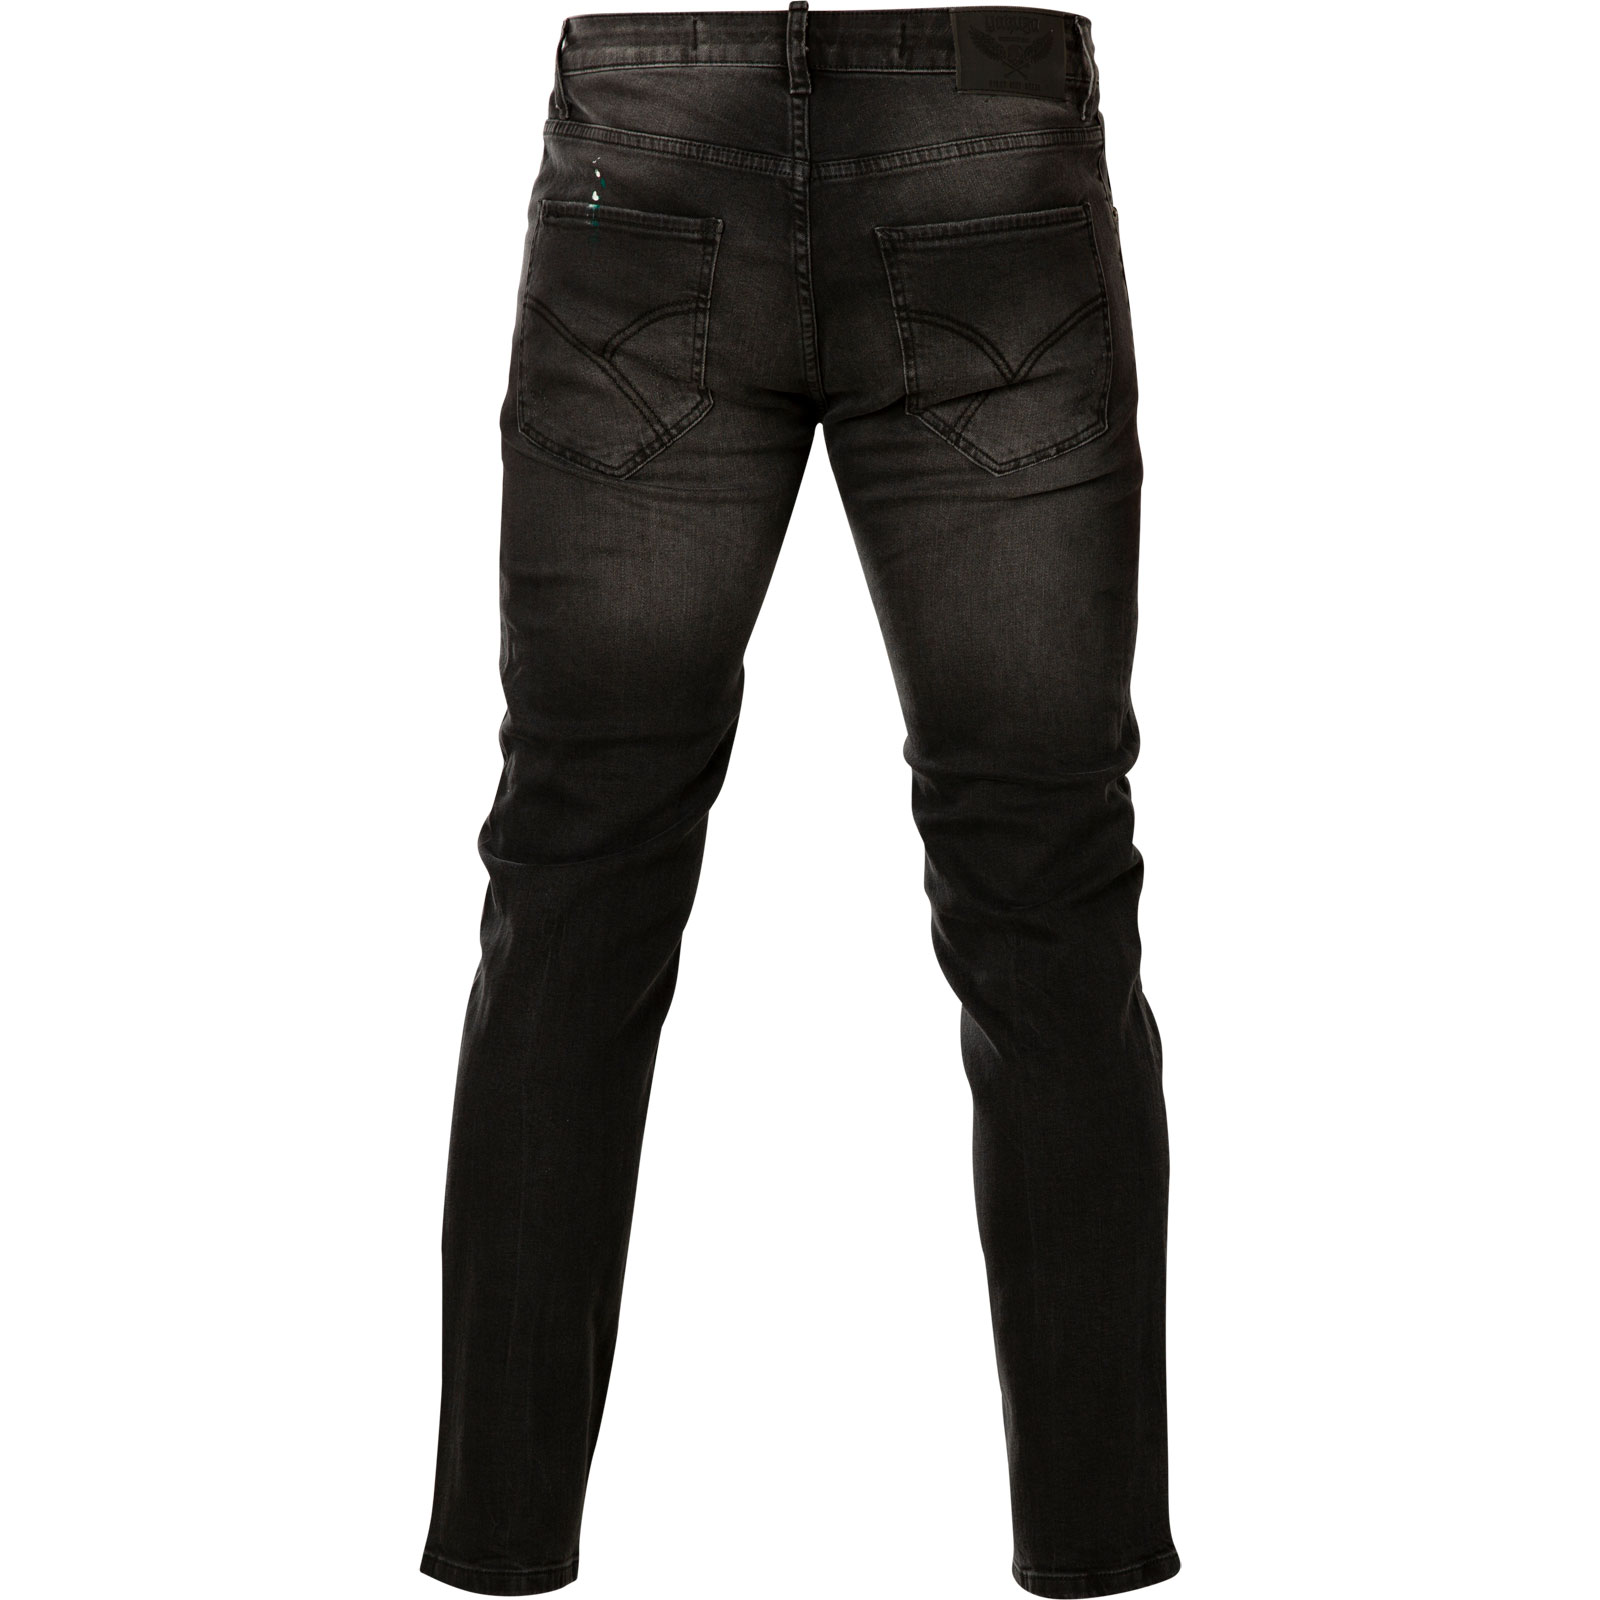 Yakuza Destroyer Straight Jeans JEB-15044 with lots of colourful splotches